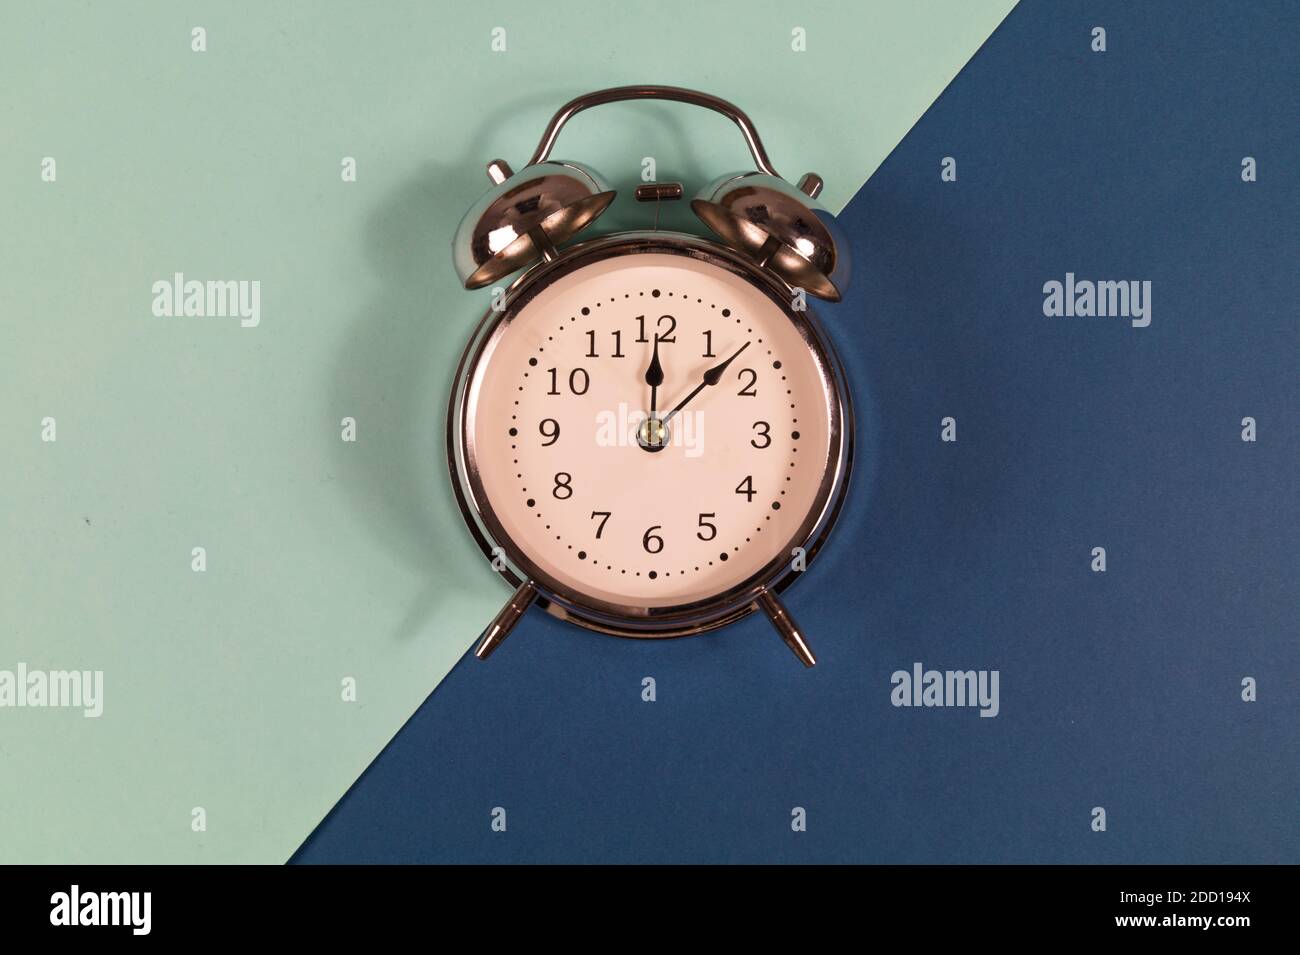 Old vintage alarm clock on two color background. Stock Photo